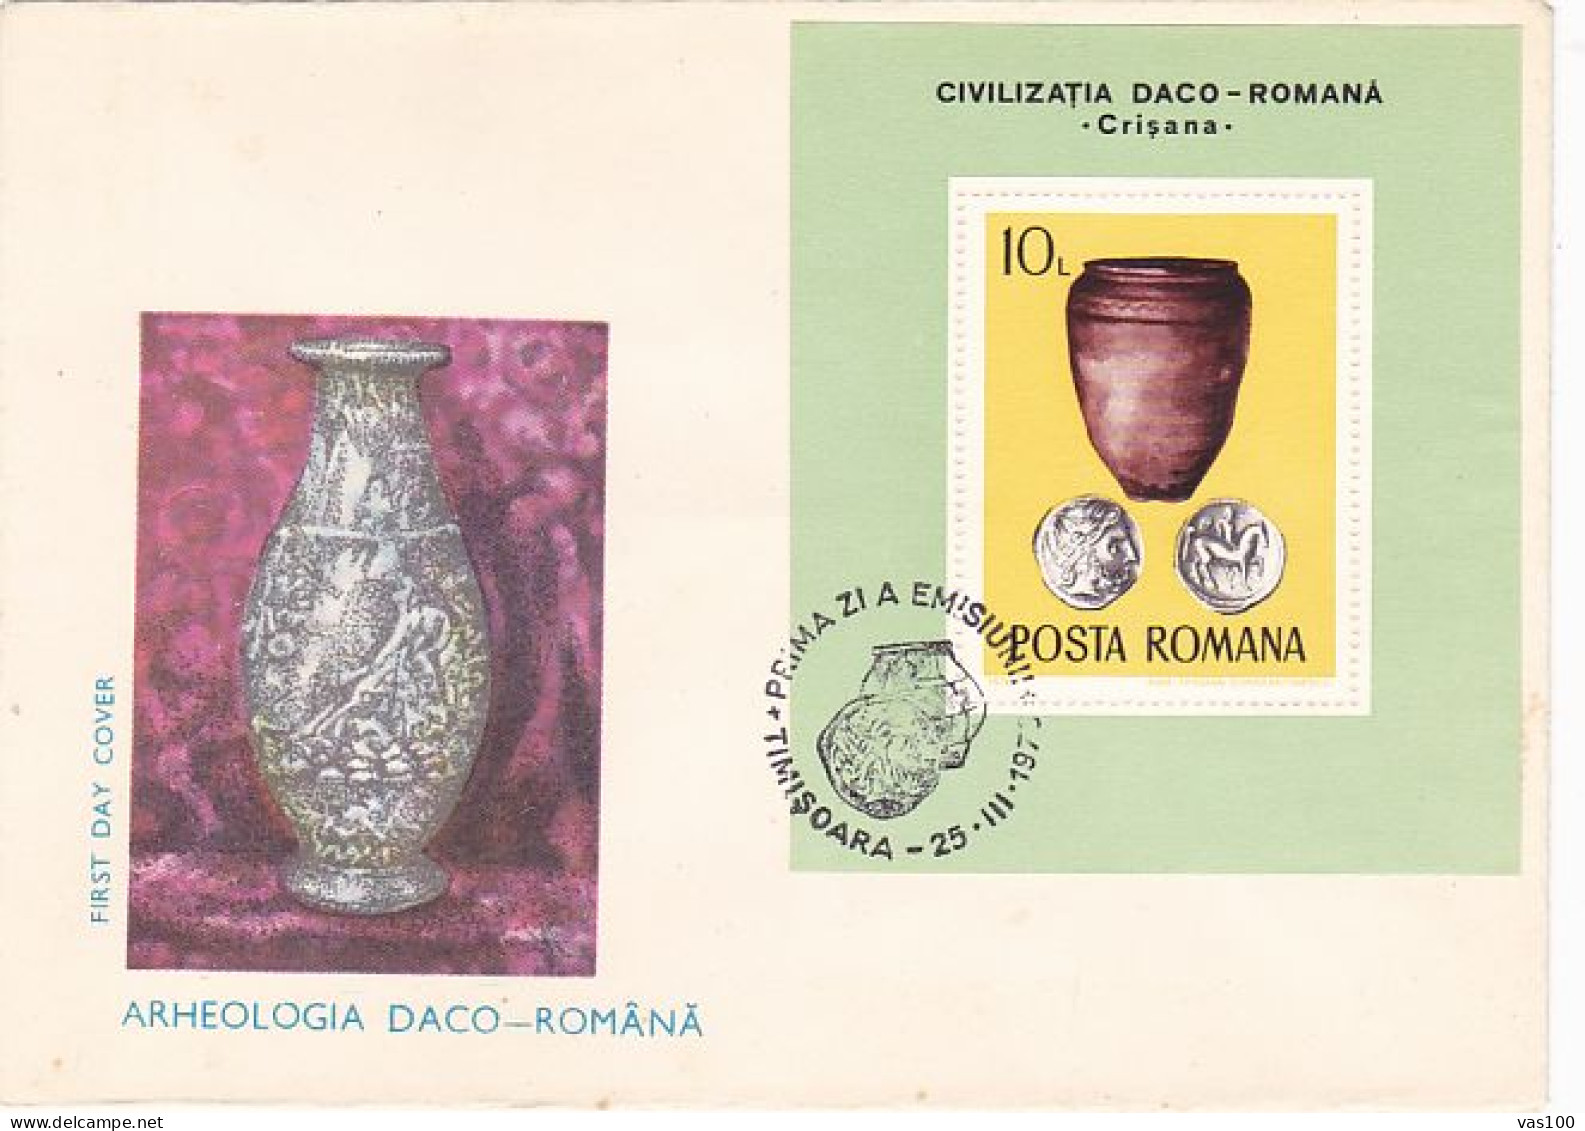 ARCHAEOLOGY, ANCIENT DACIAN AND ROMAN RELICS, COVER FDC, 1976, ROMANIA - Archéologie